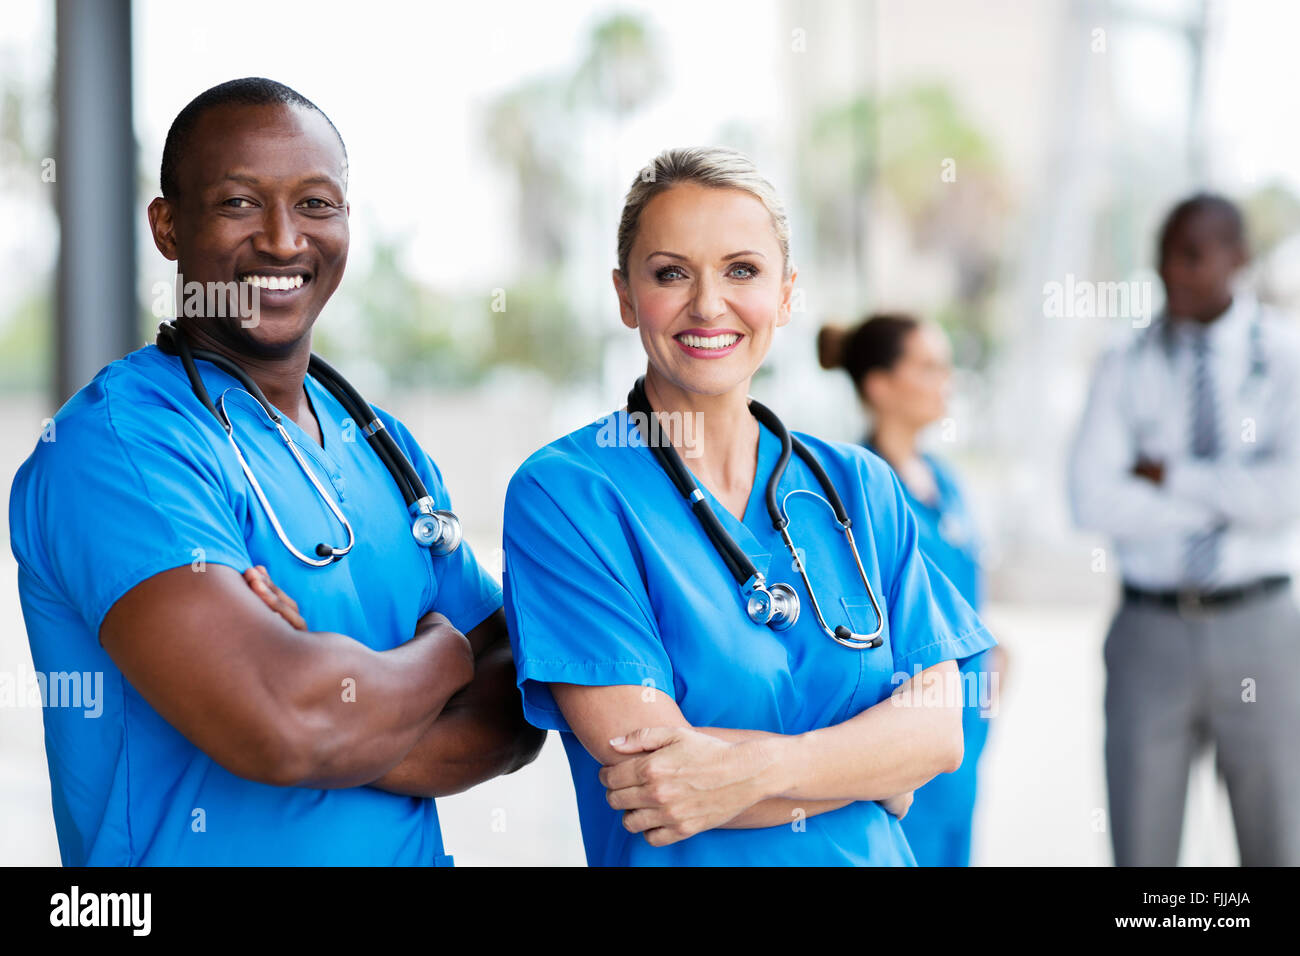 portrait of happy medical co-workers arms crossed Stock Photo